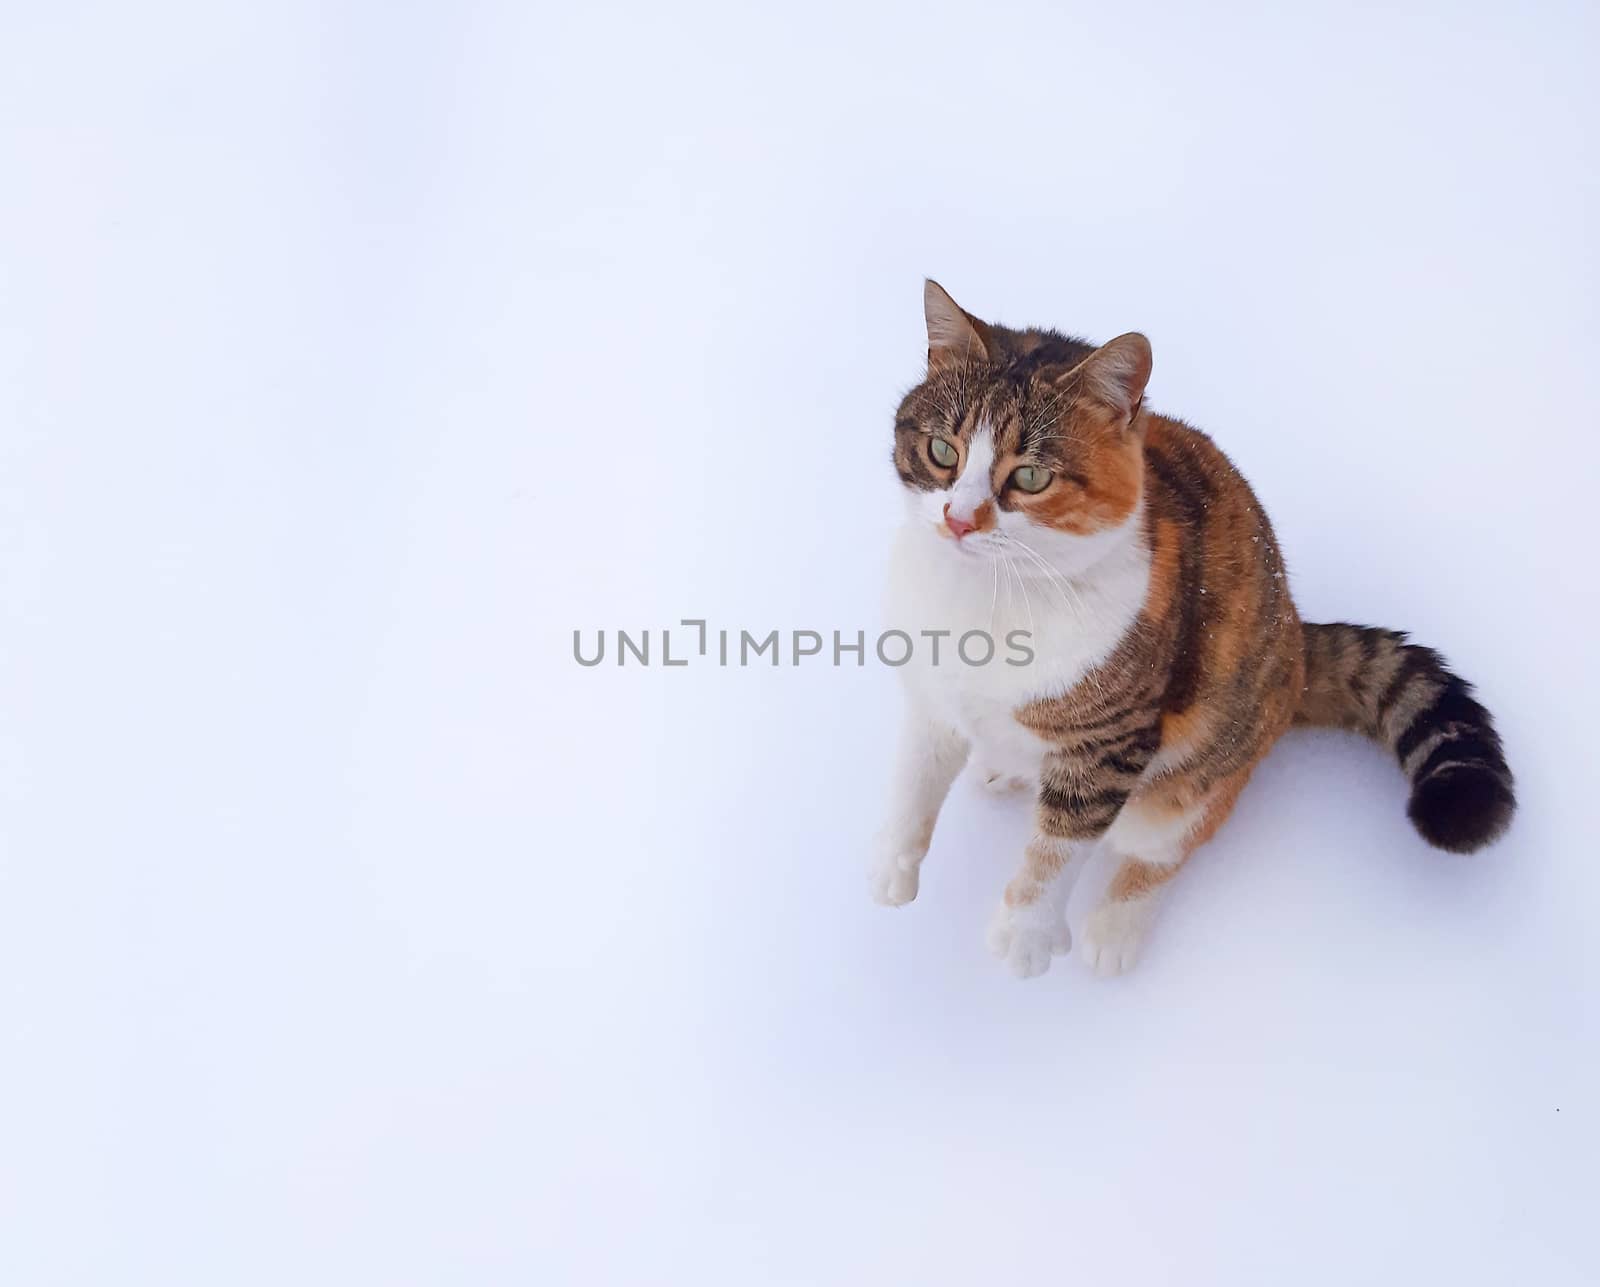 A beautiful cat on a white background is waiting for the food.